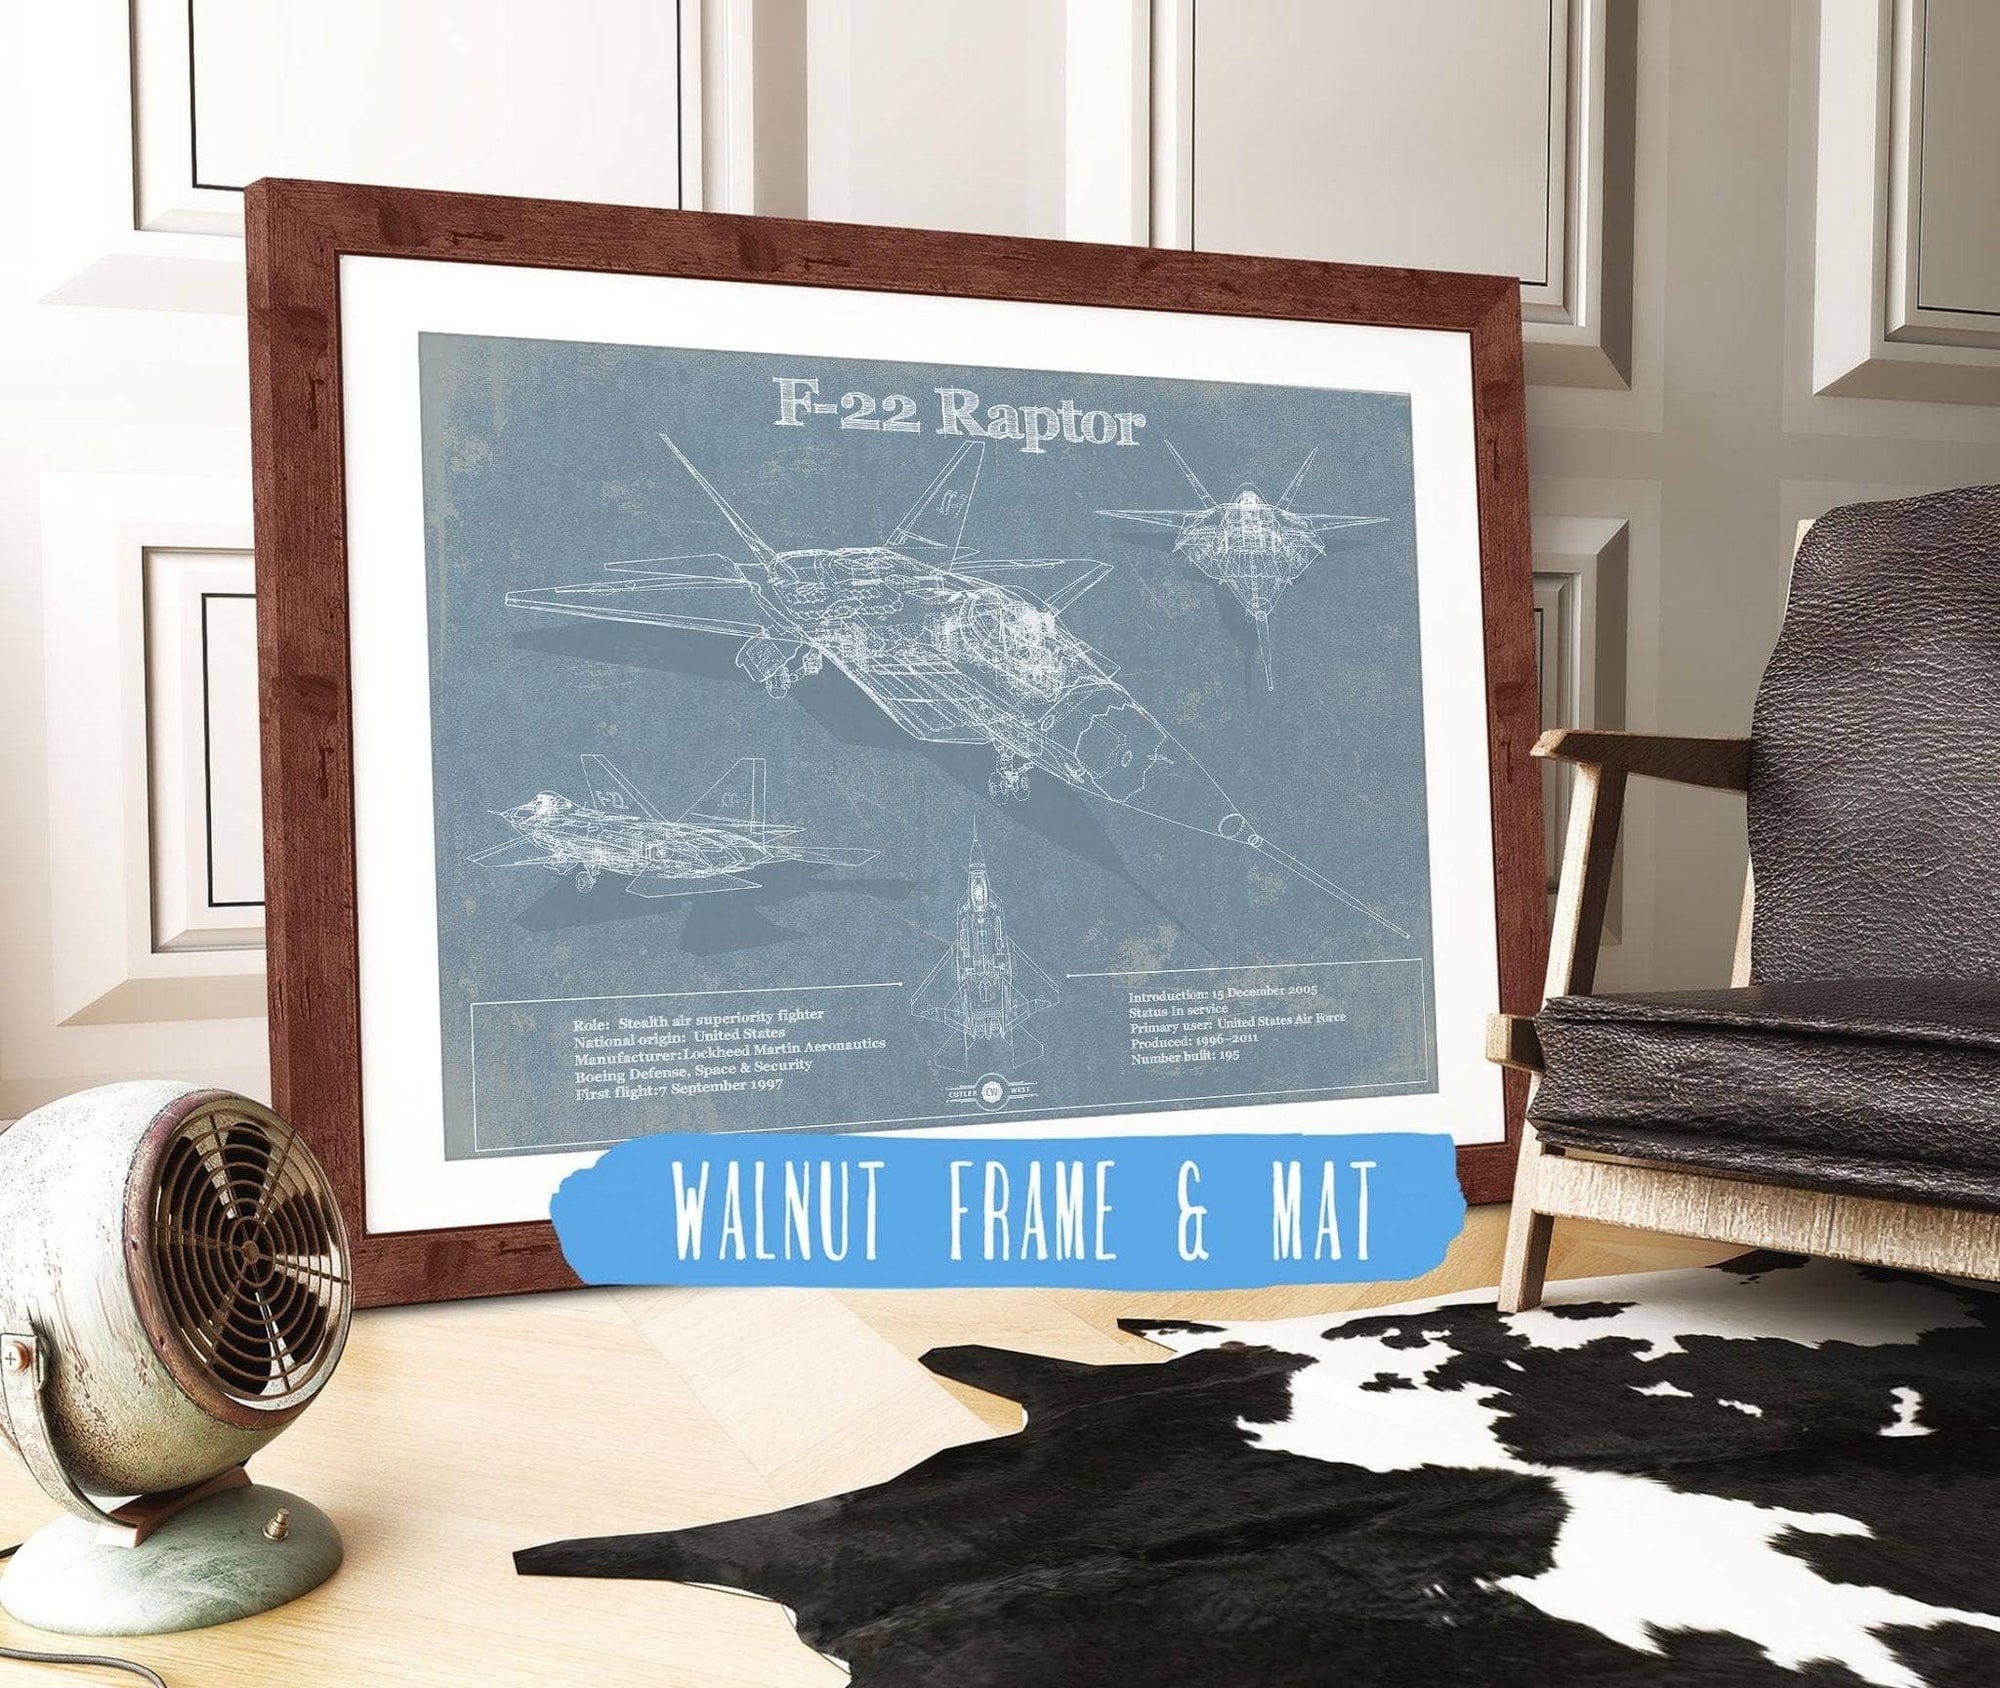 Cutler West Best Selling Collection 14" x 11" / Walnut Frame & Mat F-22 Raptor Aviation Blueprint Military Print - Custom Name and Squadron Text 803915045-TOP